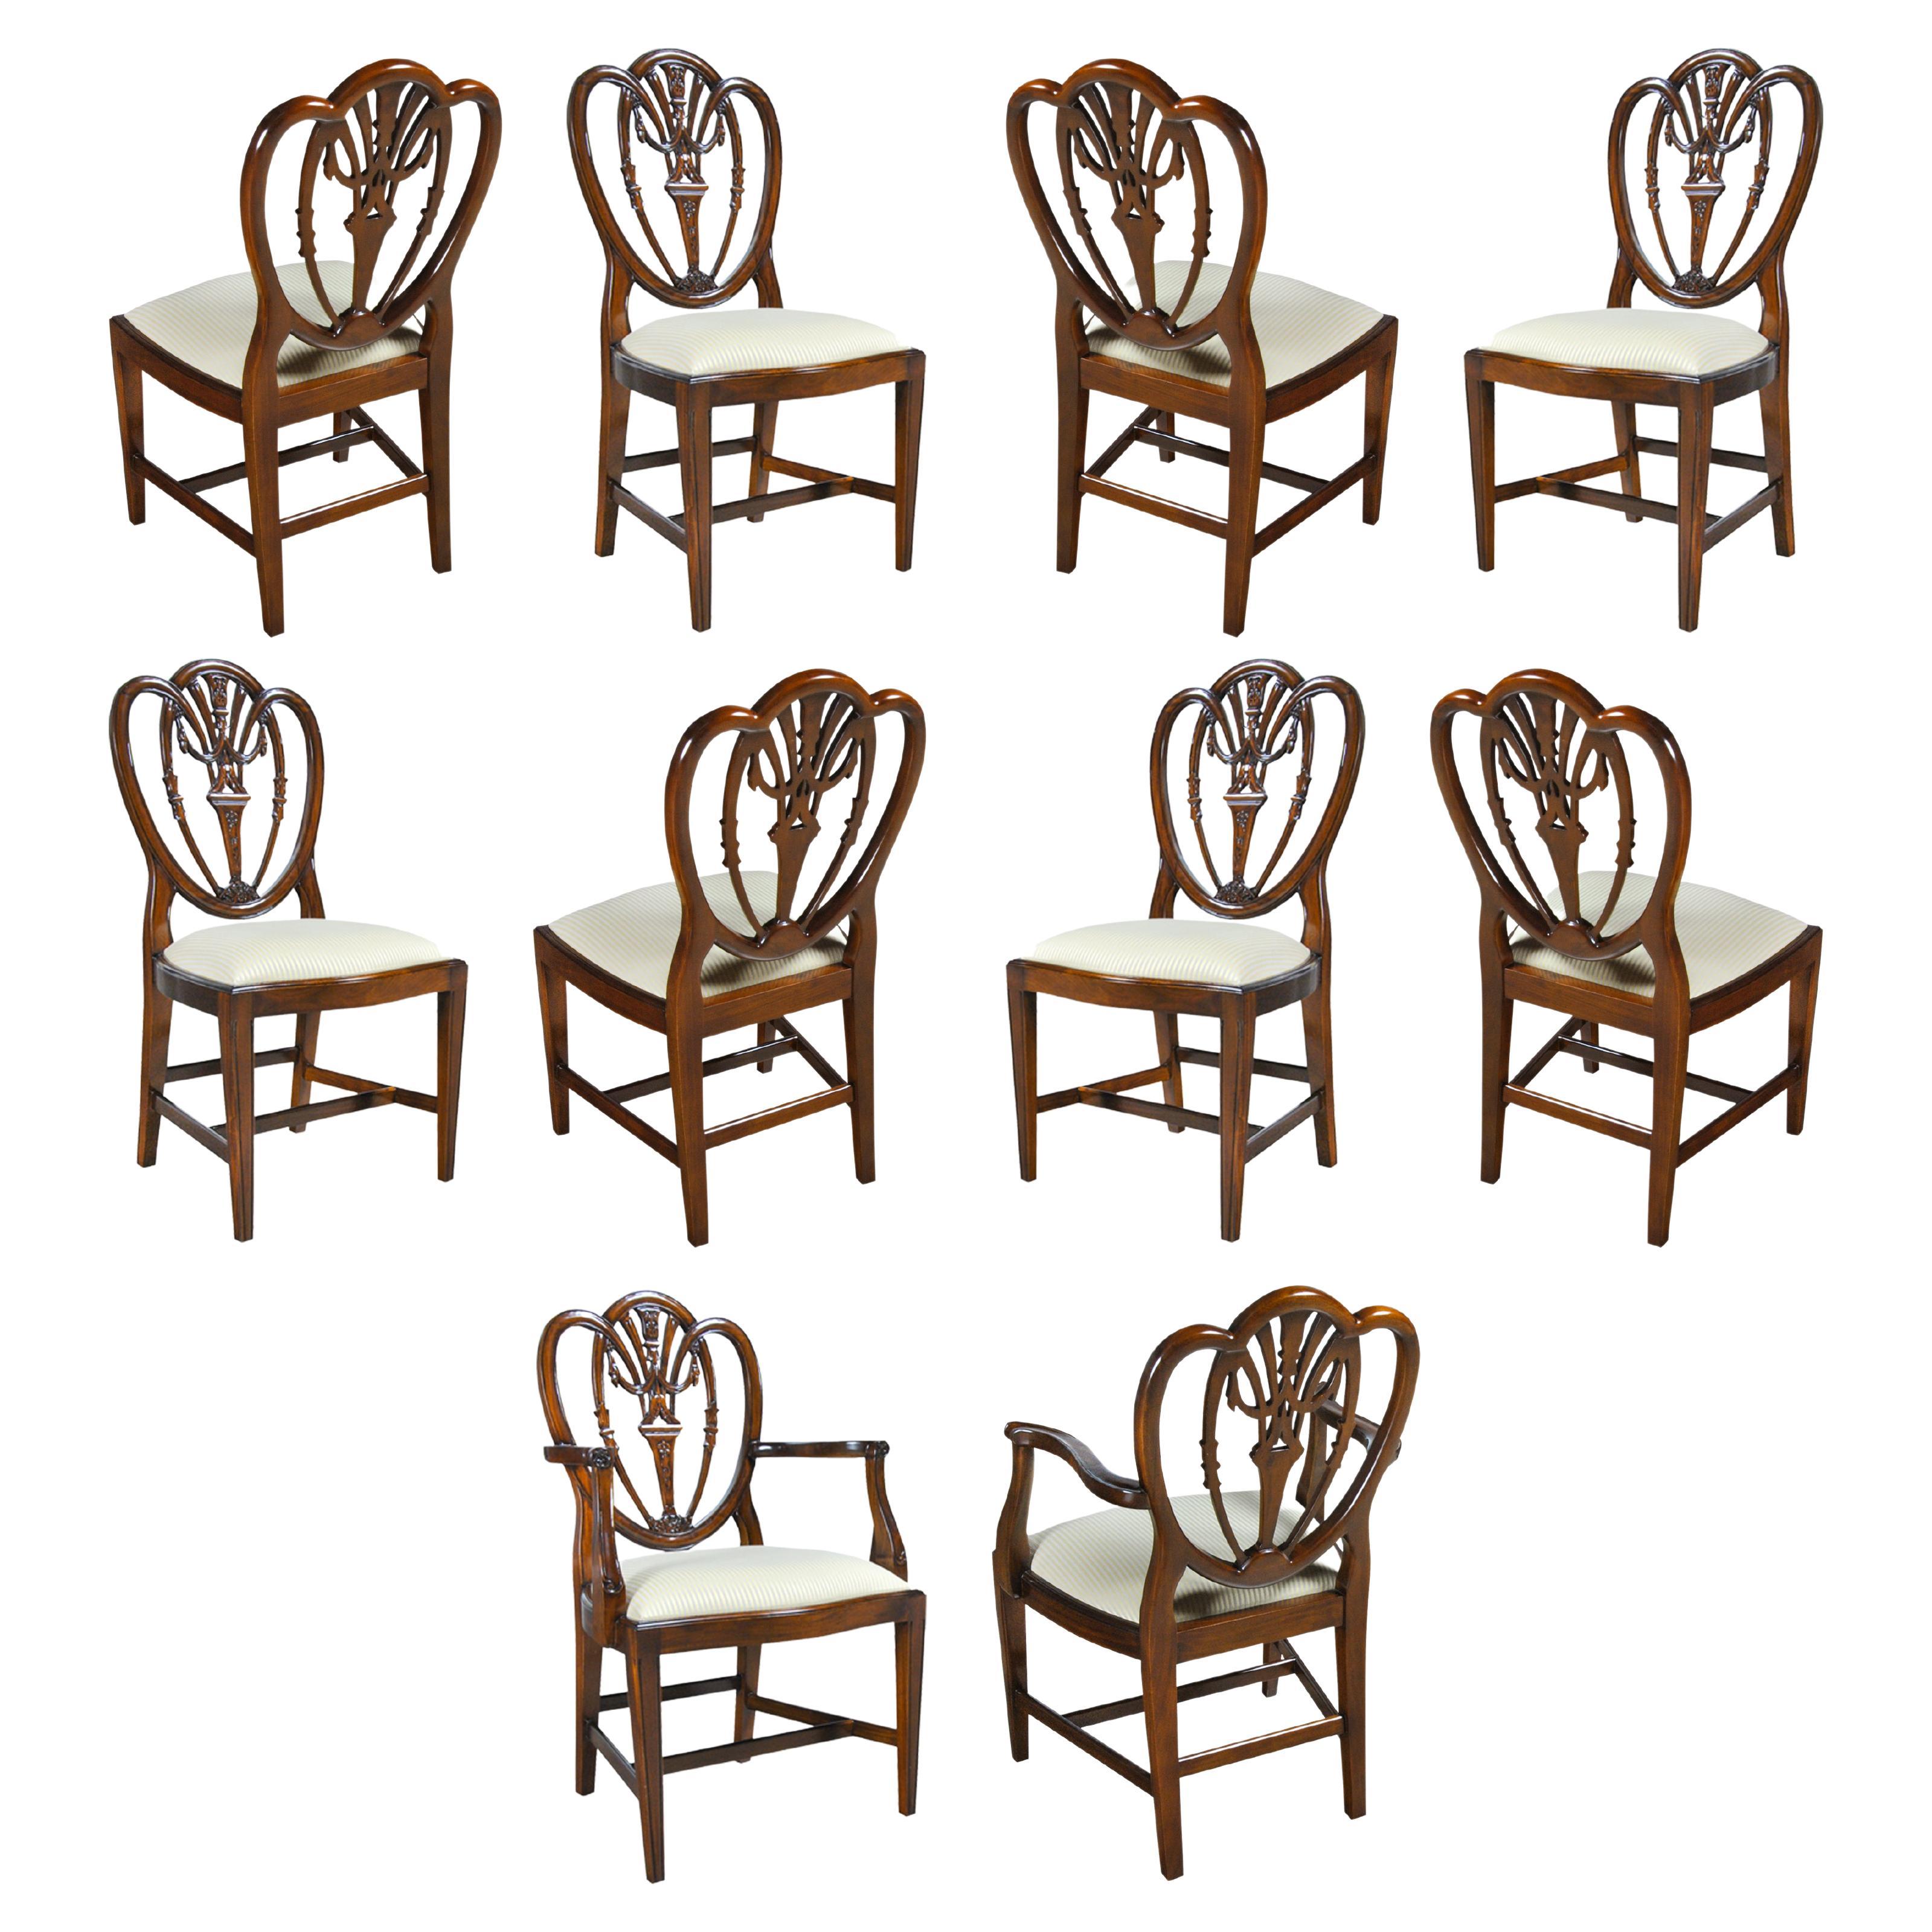 Carved Shield Back Chairs, Set of 10